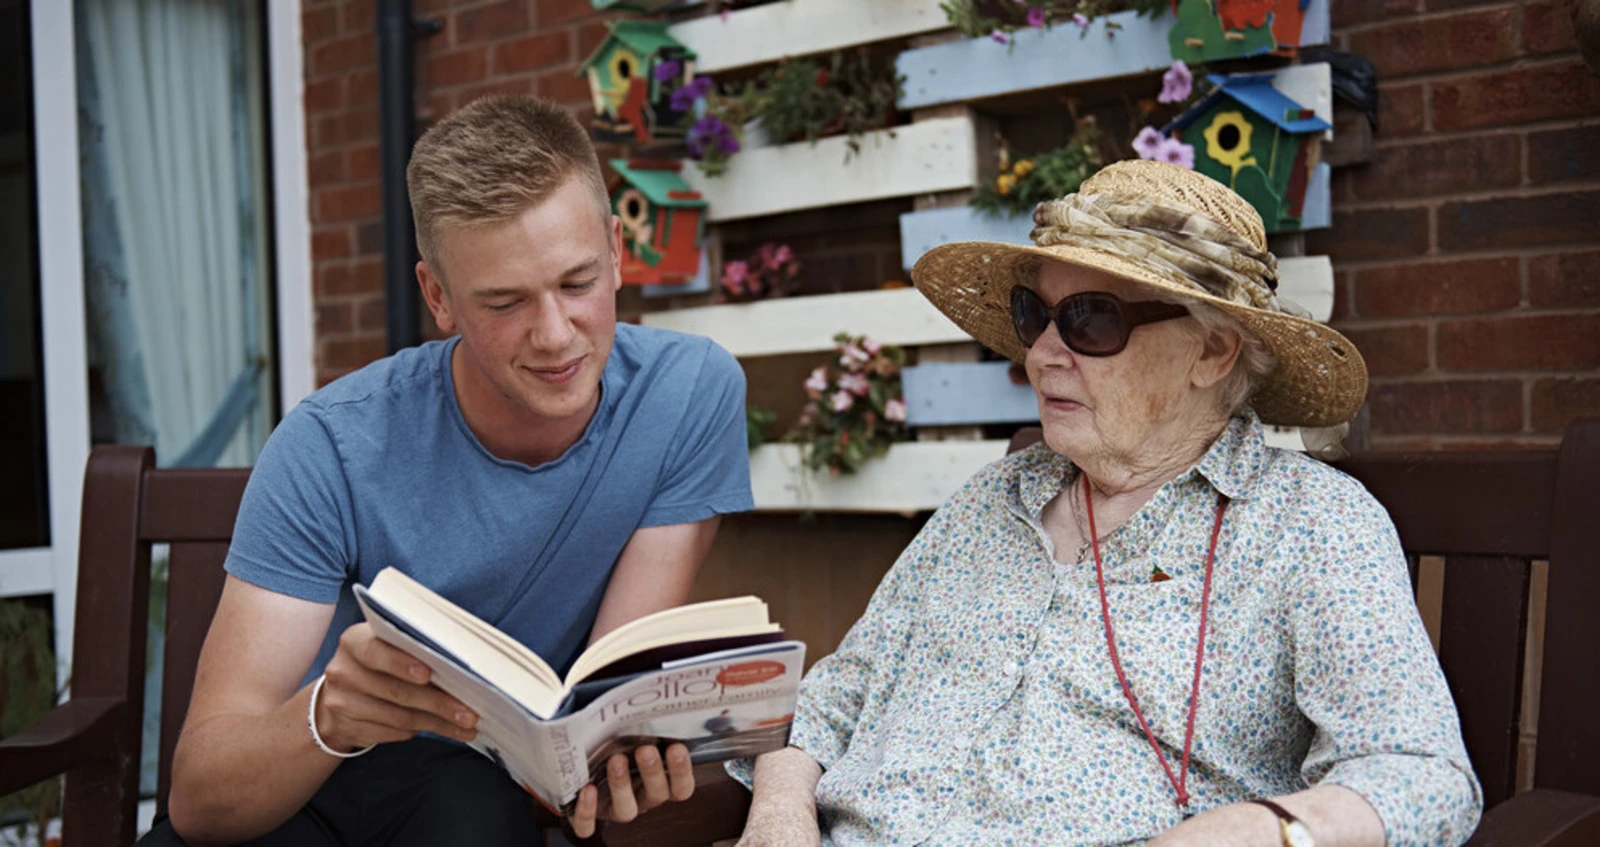 A young volunteer reading to a member of the Armed Forces community